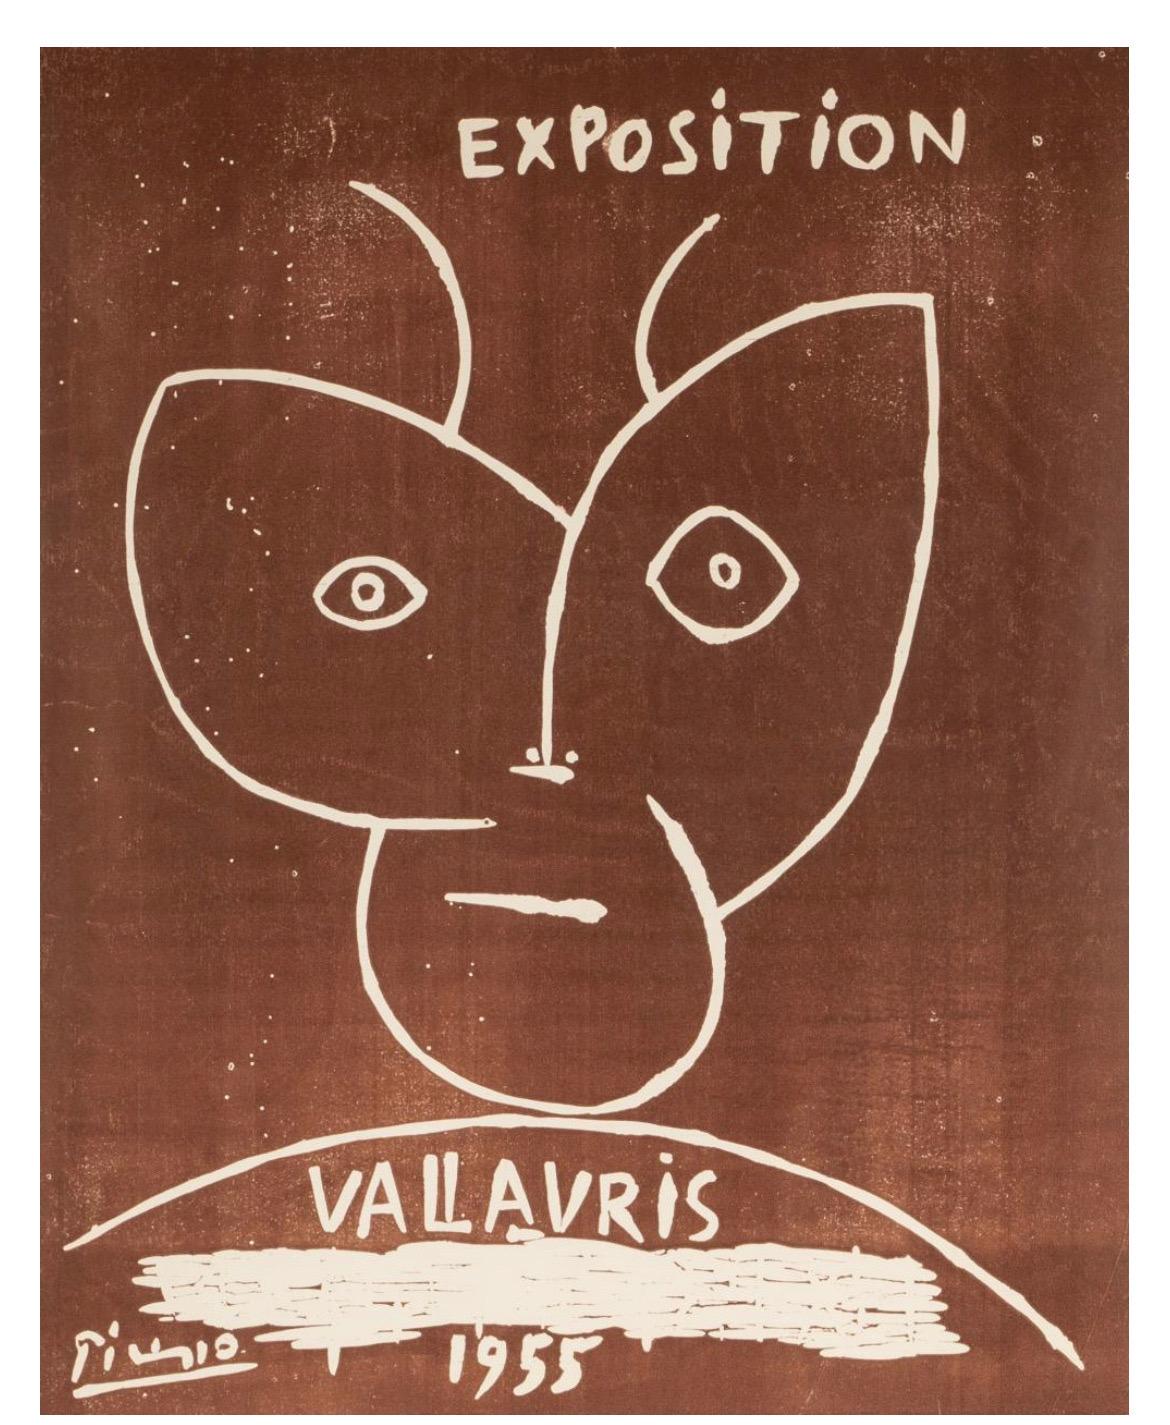 Pablo Picasso Lithograph: Vallauris. Signed in lower right margin; signed and dated 1955 in plate; matted and framed under acrylic. Measures 29 x 22 1/2 inches sight; 41 x 34 3/4 inches framed.